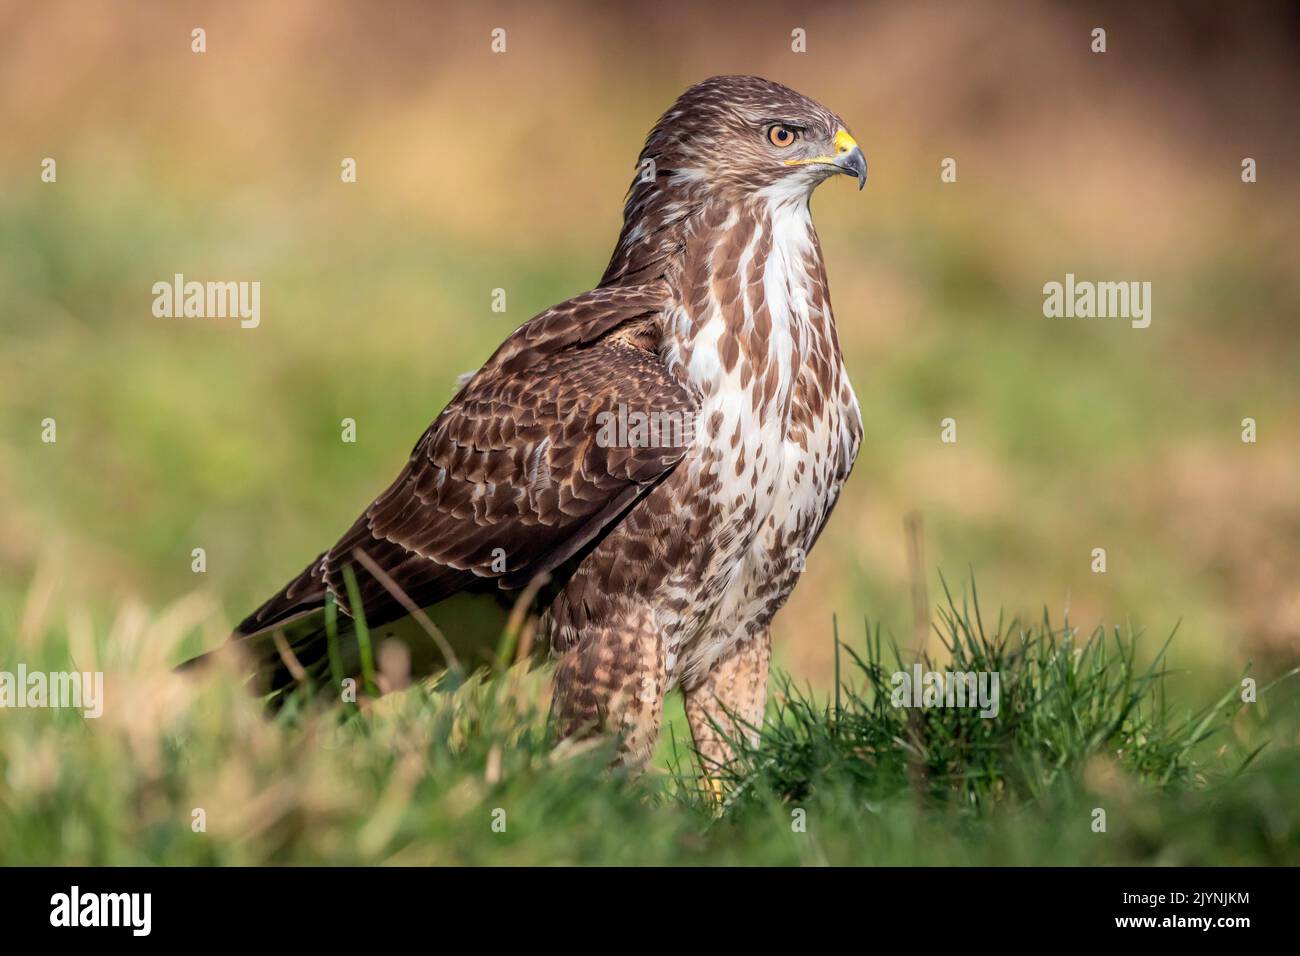 Common Buzzard (Buteo buteo) on the ground in grass in winter, clearing on the edge of a forest near Toul, Lorraine, France Stock Photo